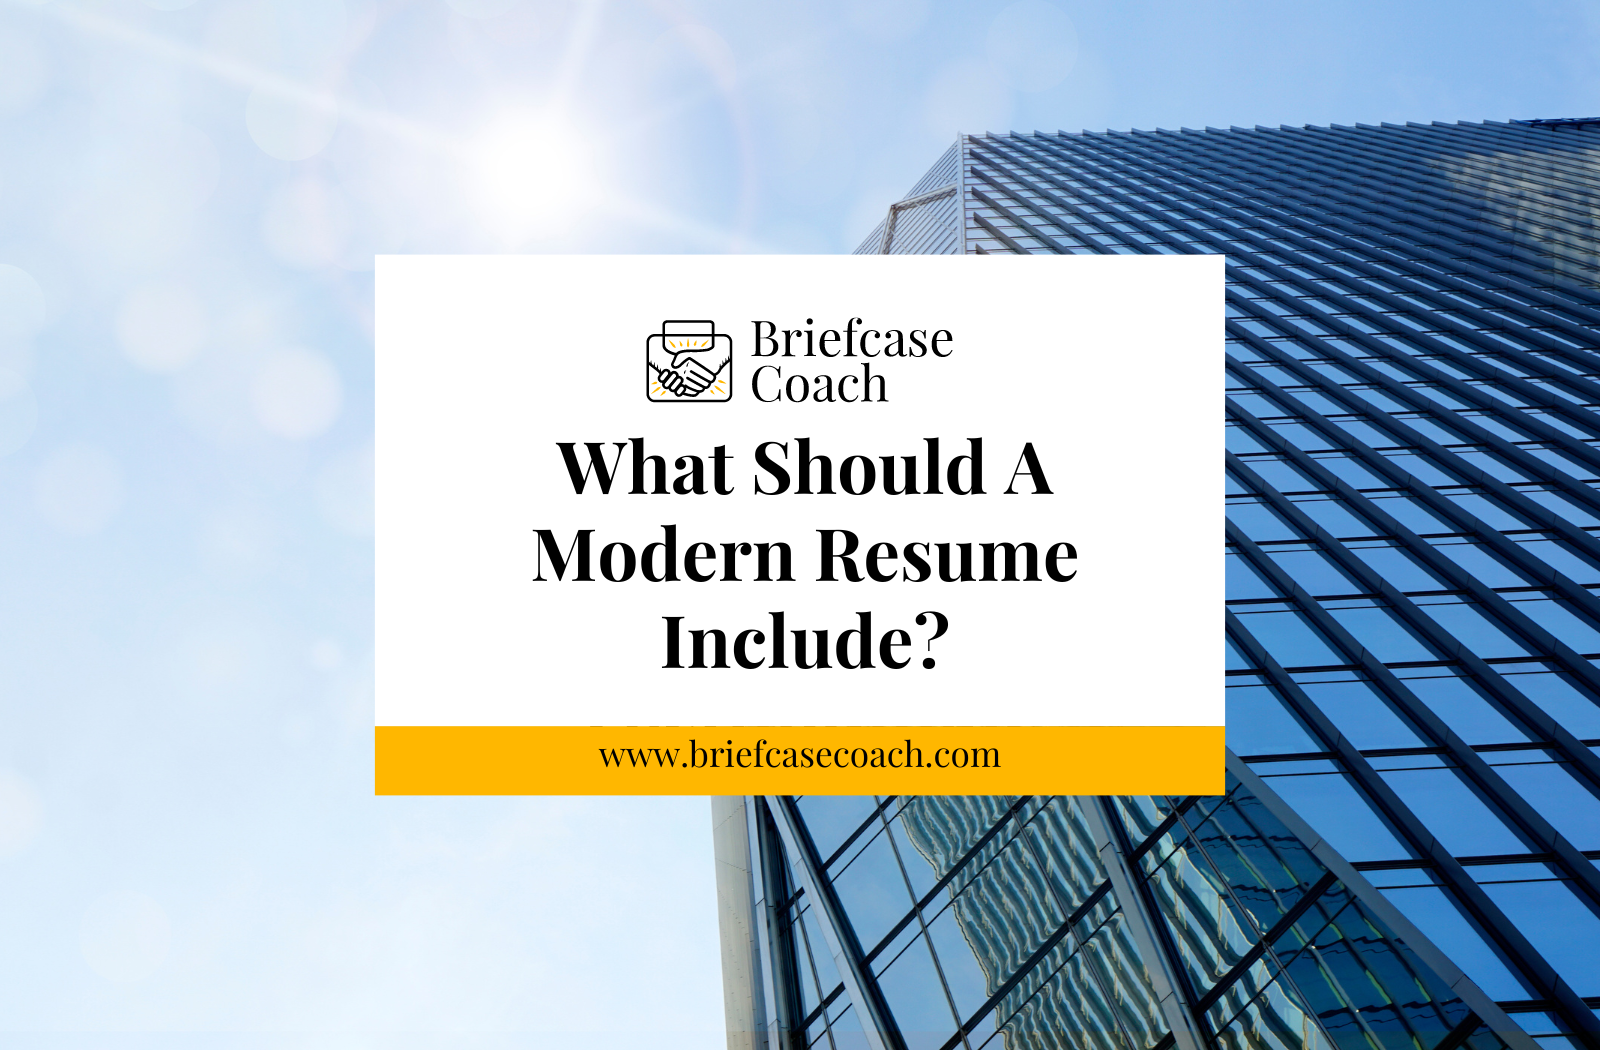 What Should A Modern Executive Resume Include?